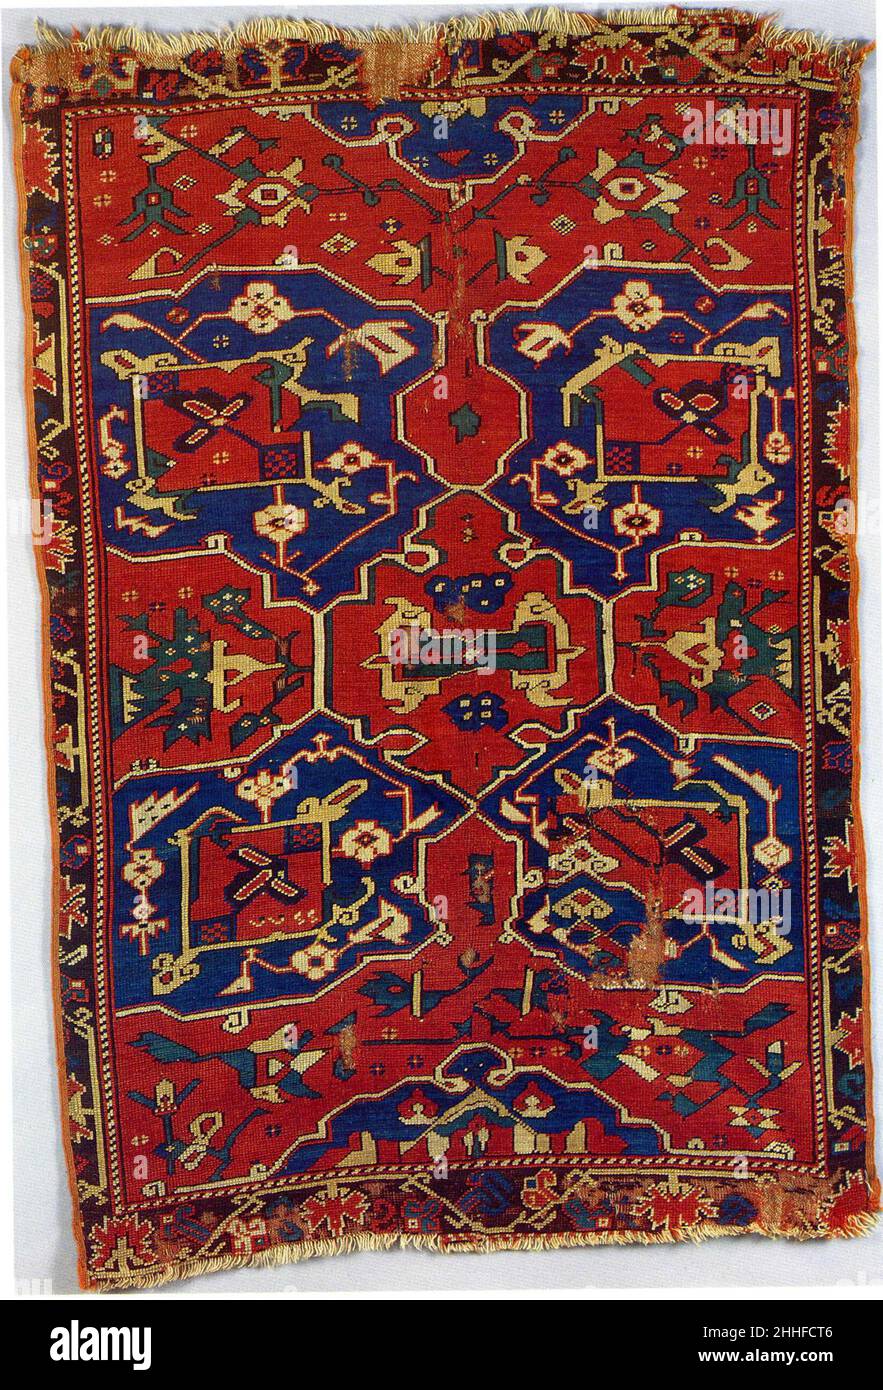 Carpet with Quatrefoil Design probably 18th century This small carpet shows a large quatrefoil design in dark blue on a red ground that stretches across the entire width of the center field, while partial cartouche-like medallions fill the upper and lower-end edges of it. Various highly stylized floral motifs decorate the larger blue motifs and the red ground. The strong geometric rendering of the flowers makes their identification difficult. However, the comparison with earlier Ushak carpets with quatrefoil designs (see for example 1972.80.4), allows the viewer to distinguish lotus flowers, f Stock Photo